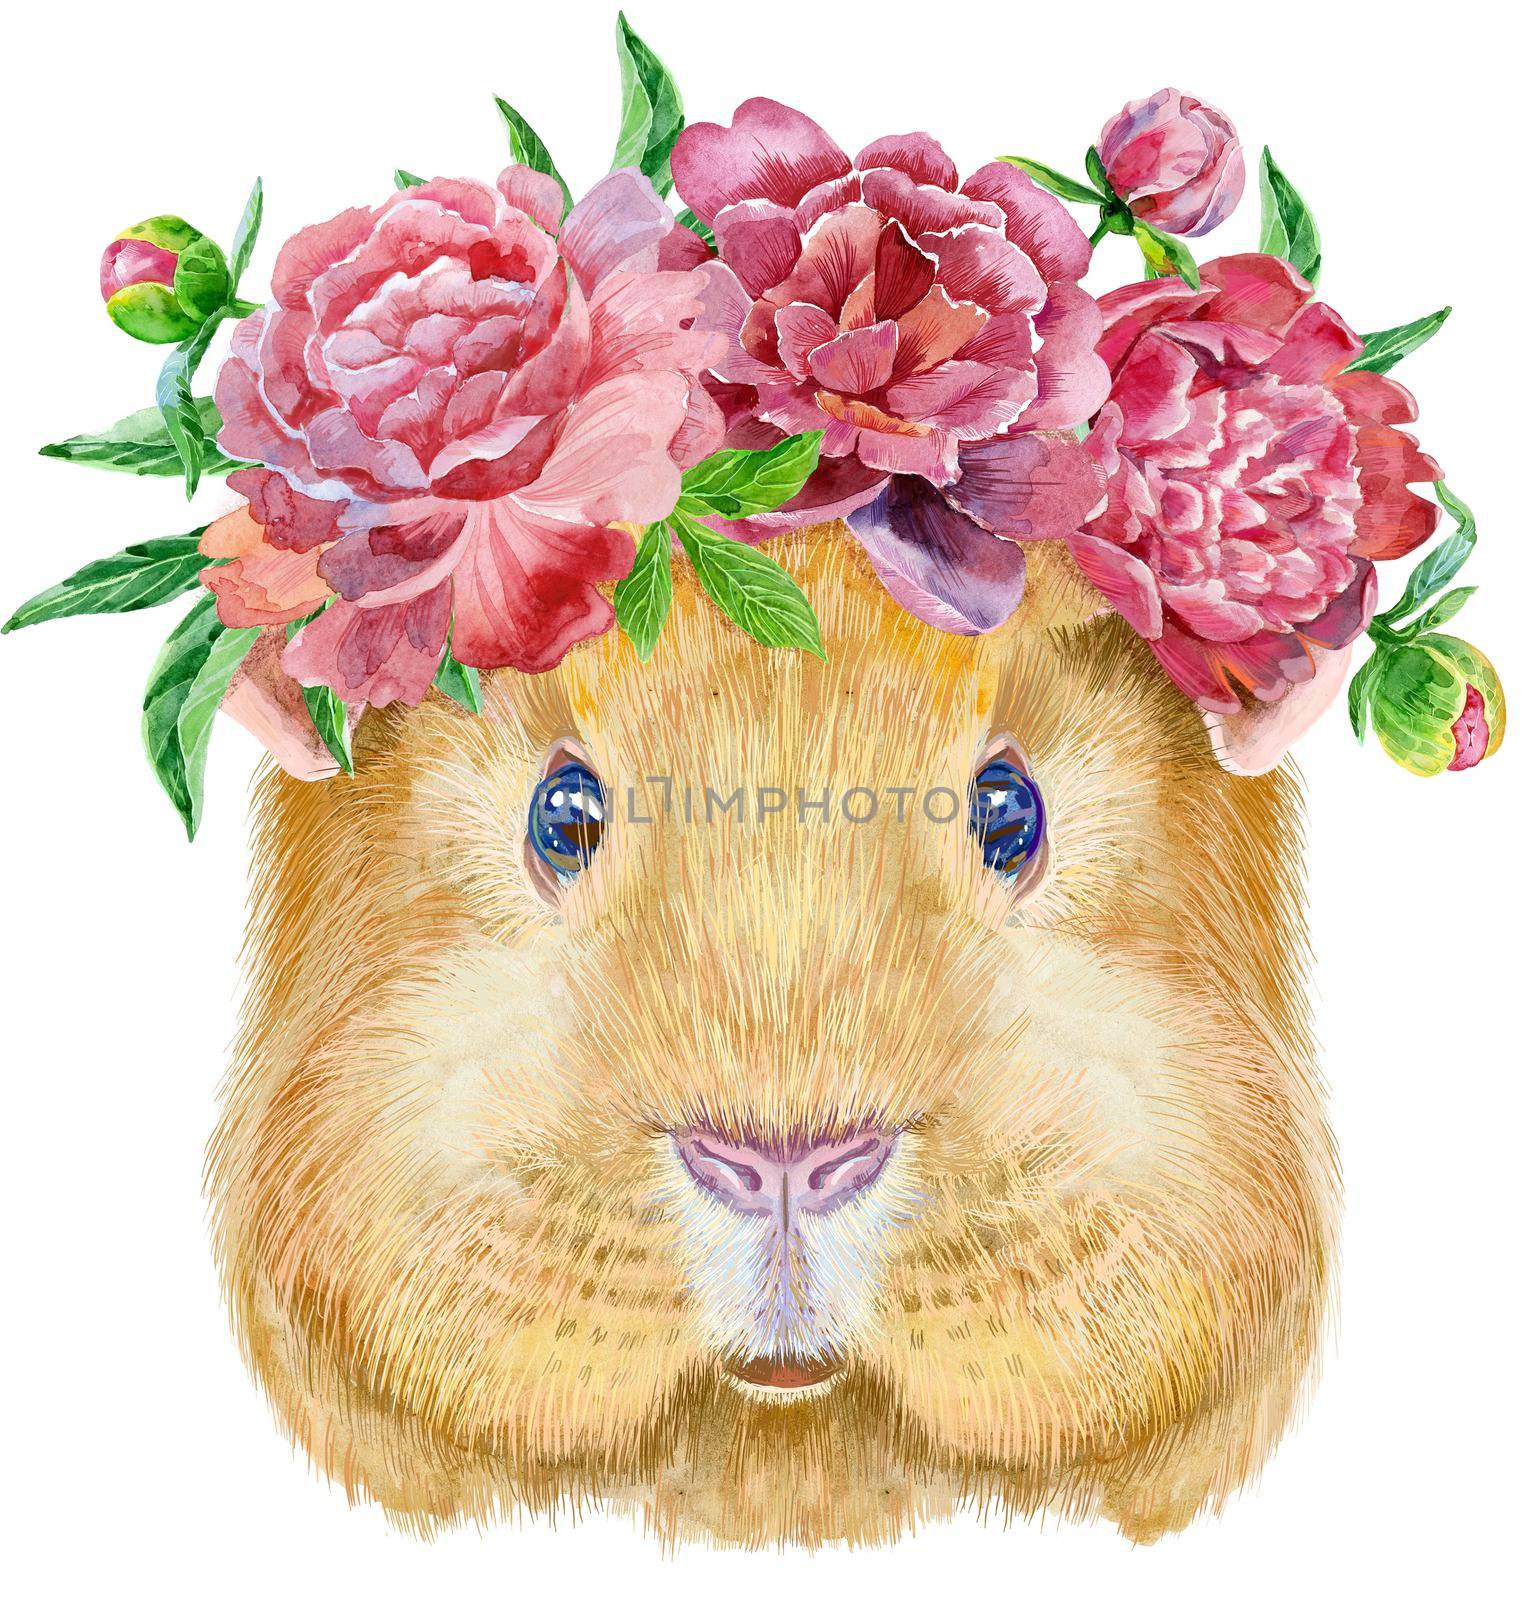 Guinea pig in a wreath of peonies. Pig for T-shirt graphics. Watercolor Self guinea pig illustration